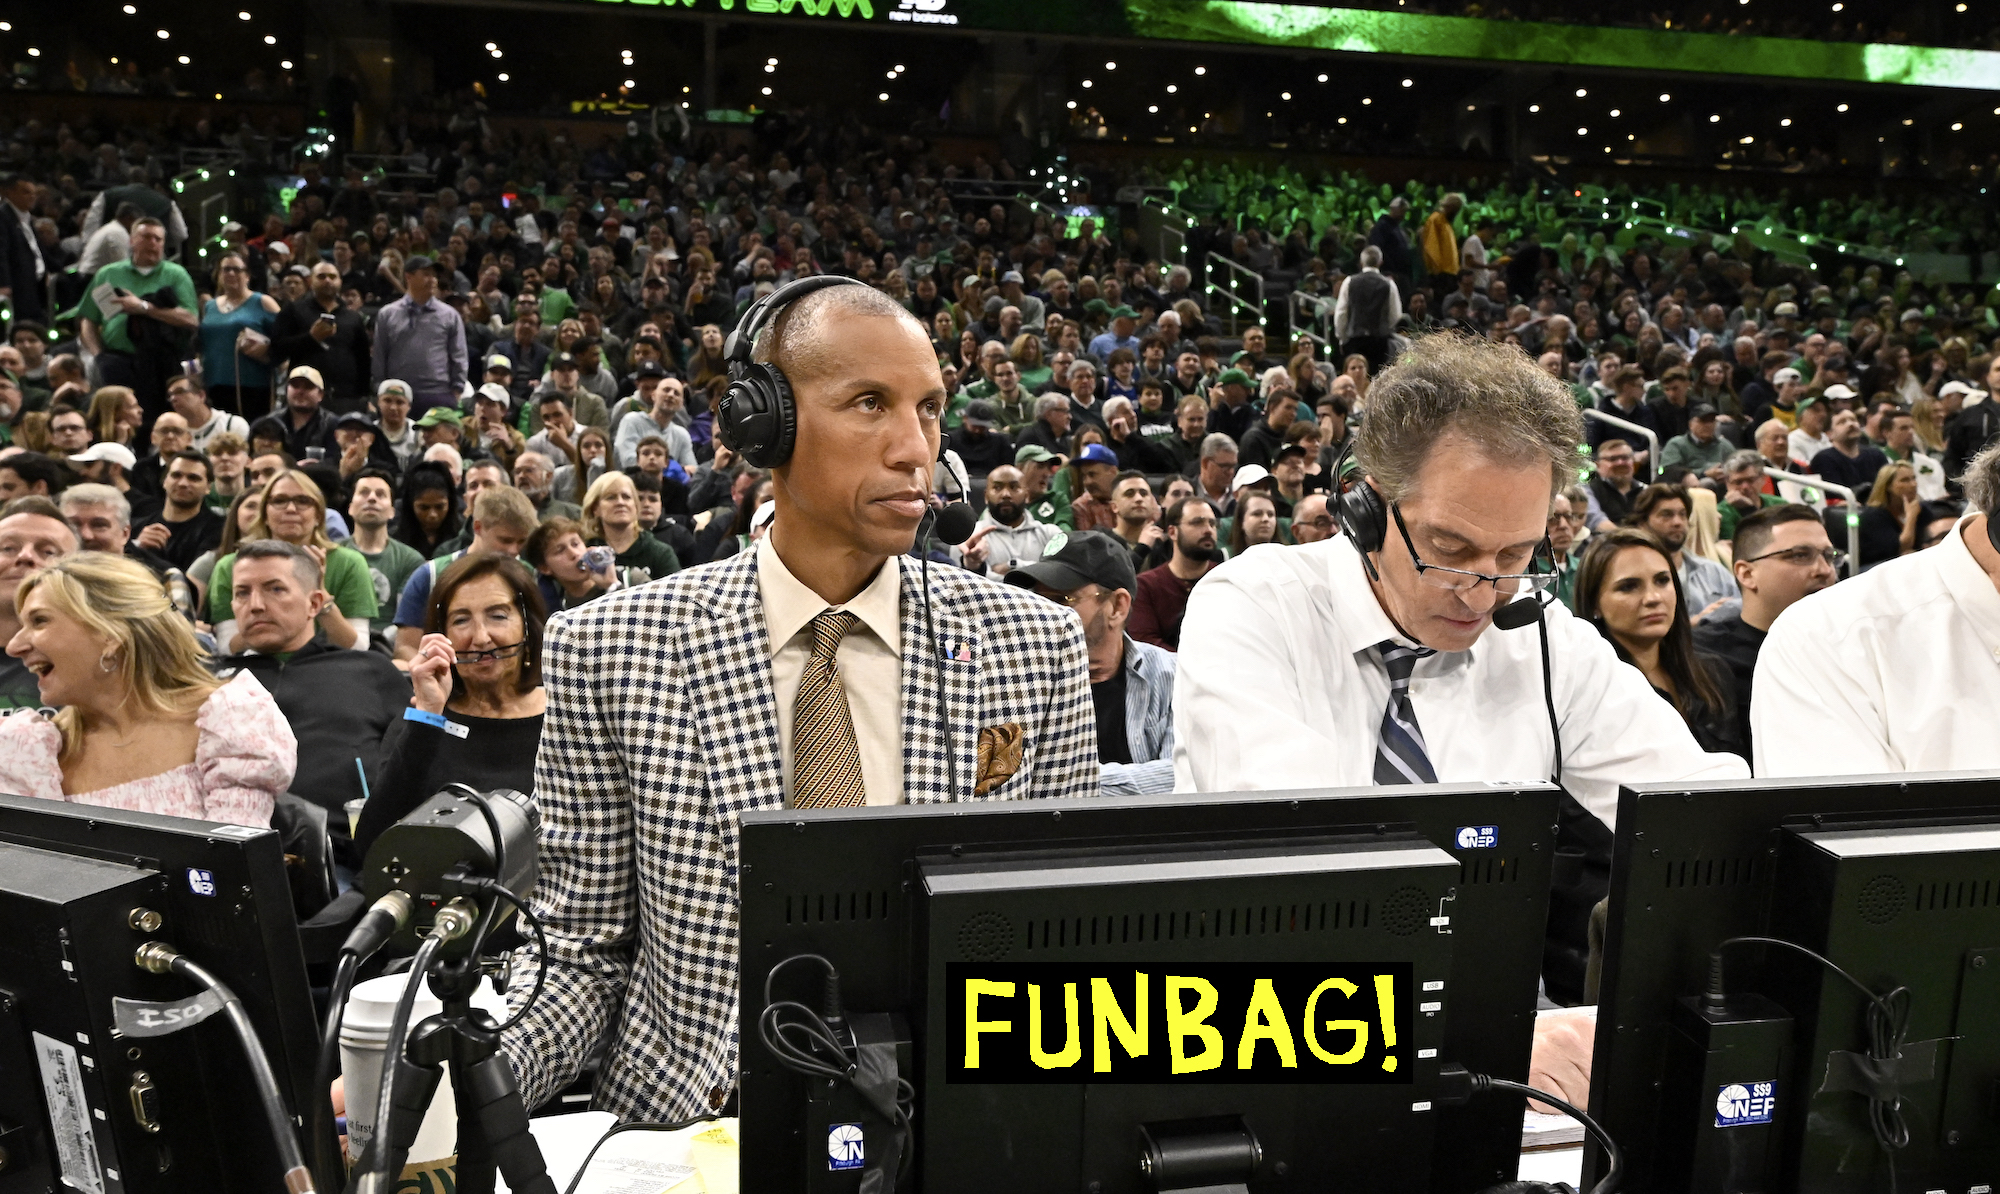 BOSTON, MA - MAY 1: Reggie Miller and Kevin Harland look on during the game between the Philadelphia 76ers and Boston Celtics during Round 2 Game 1 of the 2023 NBA Playoffs on May 1, 2023 at the TD Garden in Boston, Massachusetts. NOTE TO USER: User expressly acknowledges and agrees that, by downloading and or using this photograph, User is consenting to the terms and conditions of the Getty Images License Agreement. Mandatory Copyright Notice: Copyright 2023 NBAE (Photo by David Dow/NBAE via Getty Images)